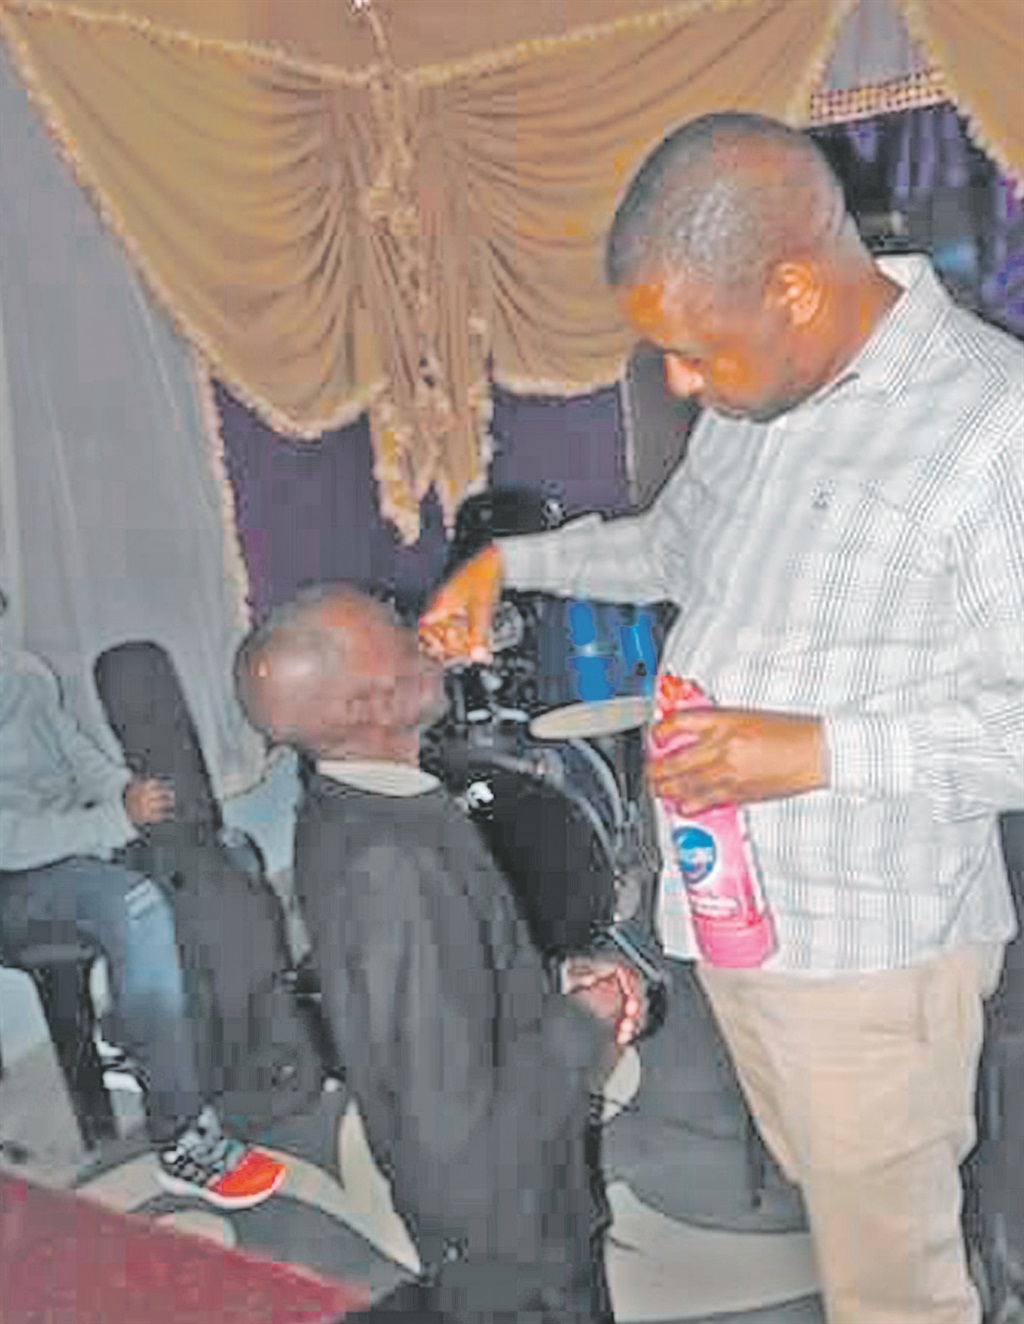 Pastor Sipho Mphakathi gives a member of his church concentrated bleach to swallow.   